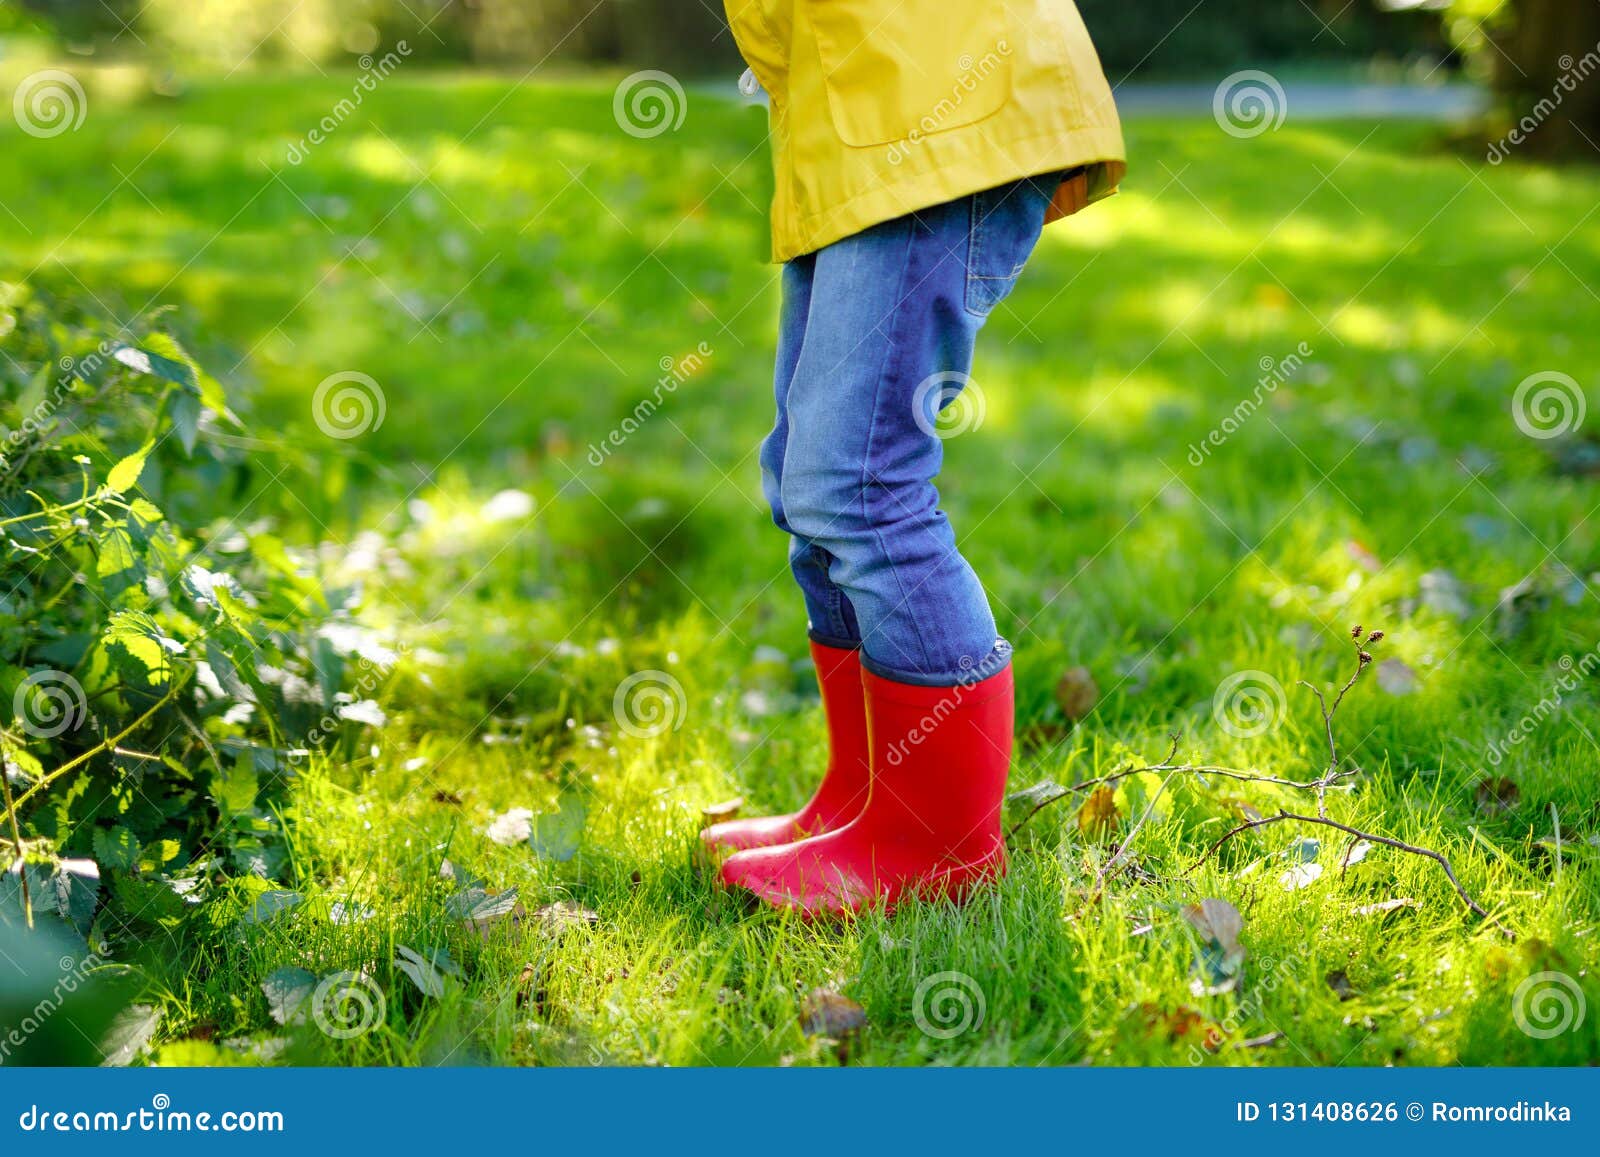 Little Child In Colorful Rain Boots 